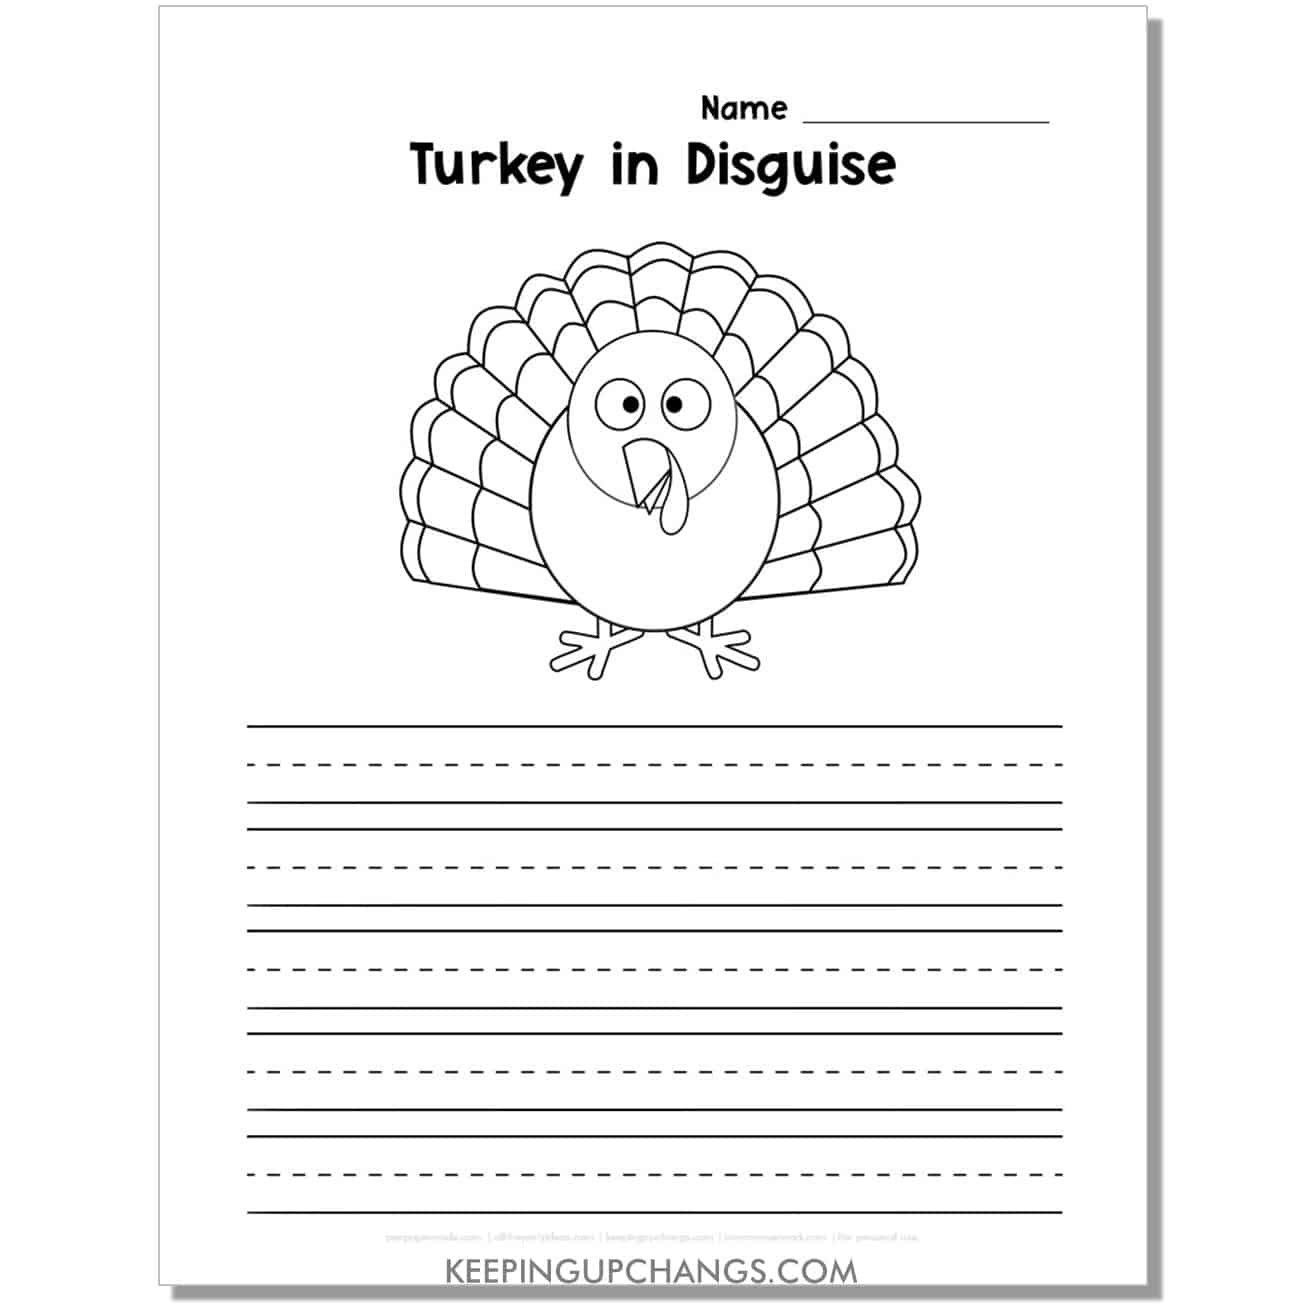 hide tom turkey disguise project printable template with picture and dotted primary lines for writing.